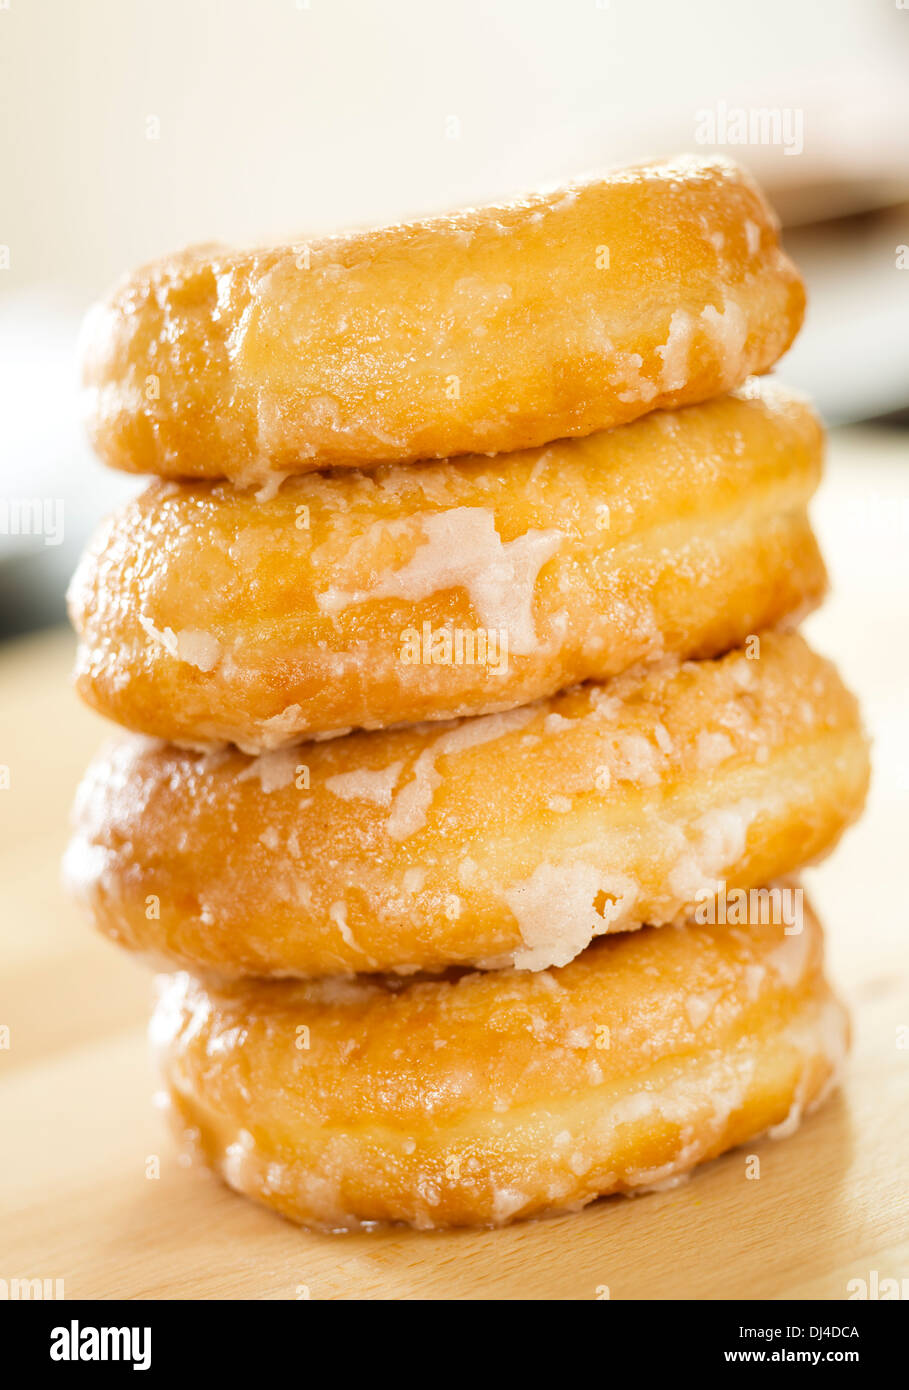 Pile of doughnuts / donuts Stock Photo